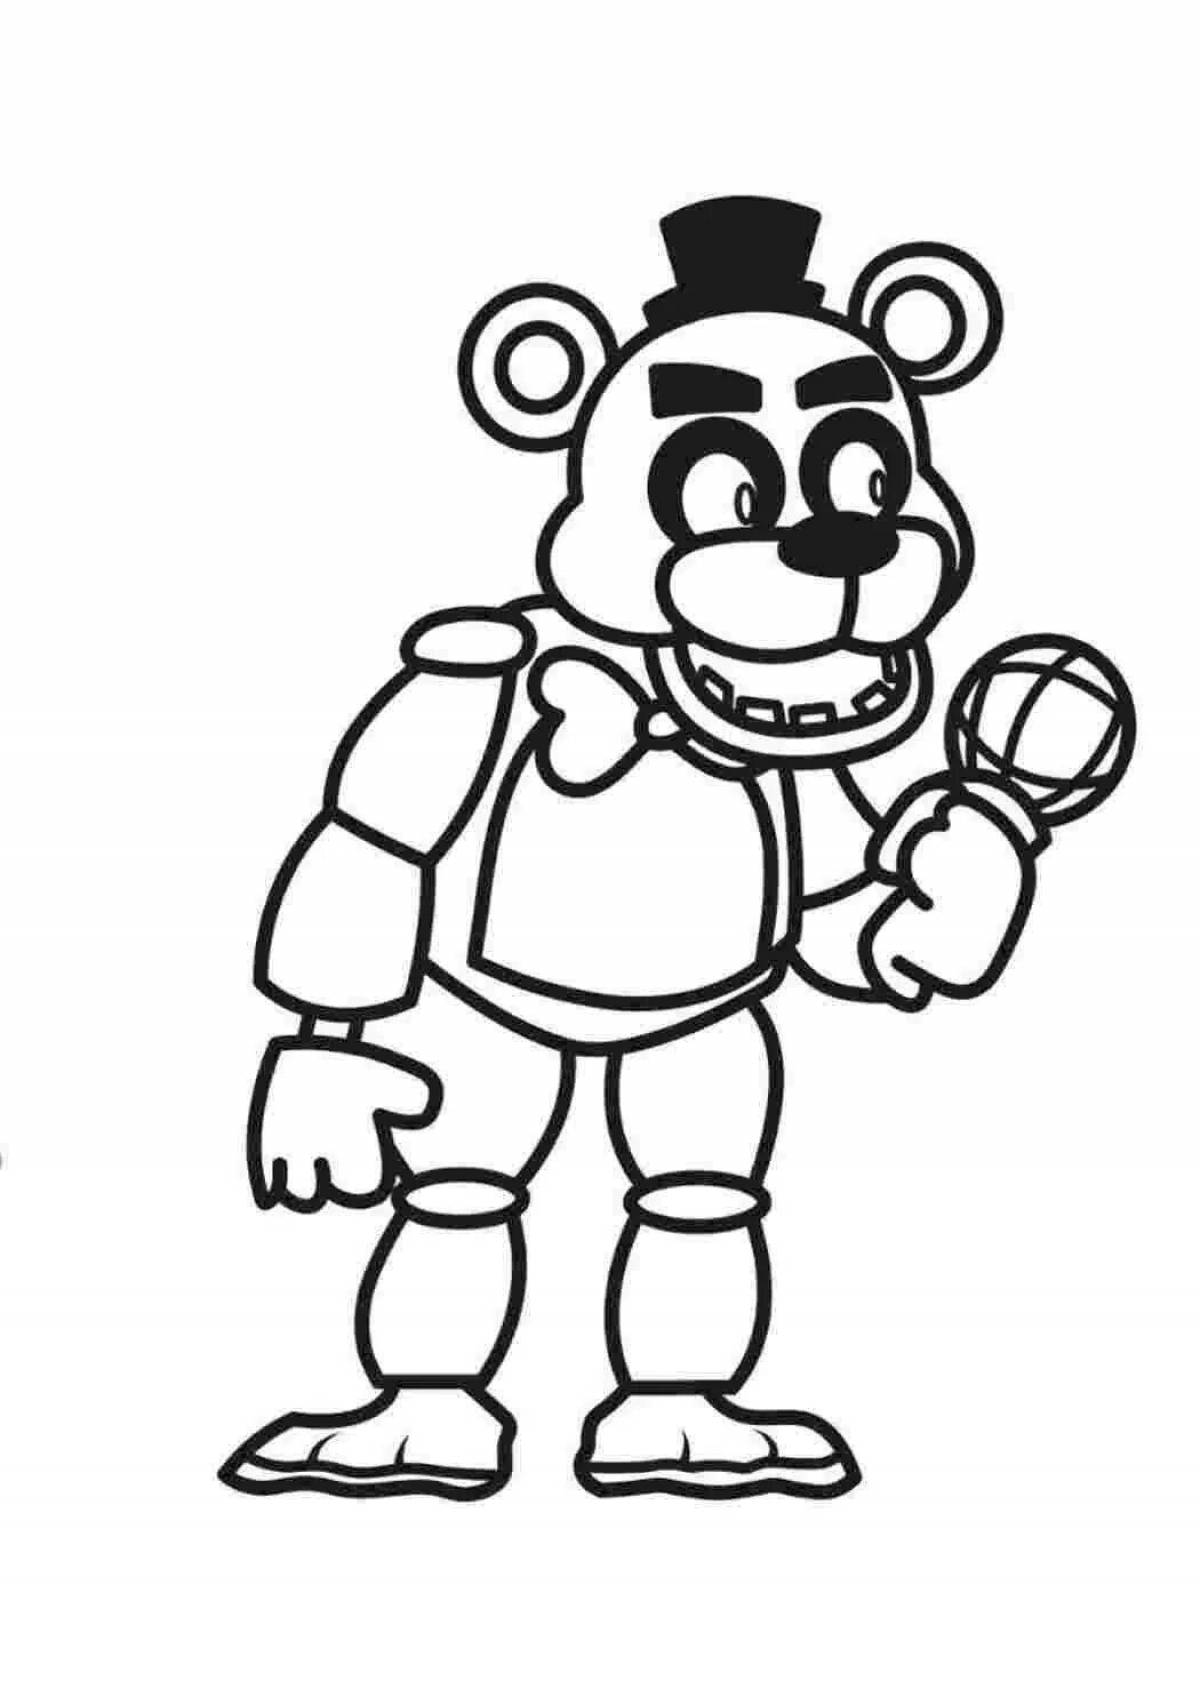 Colorful fnaf 9 coloring book for boys